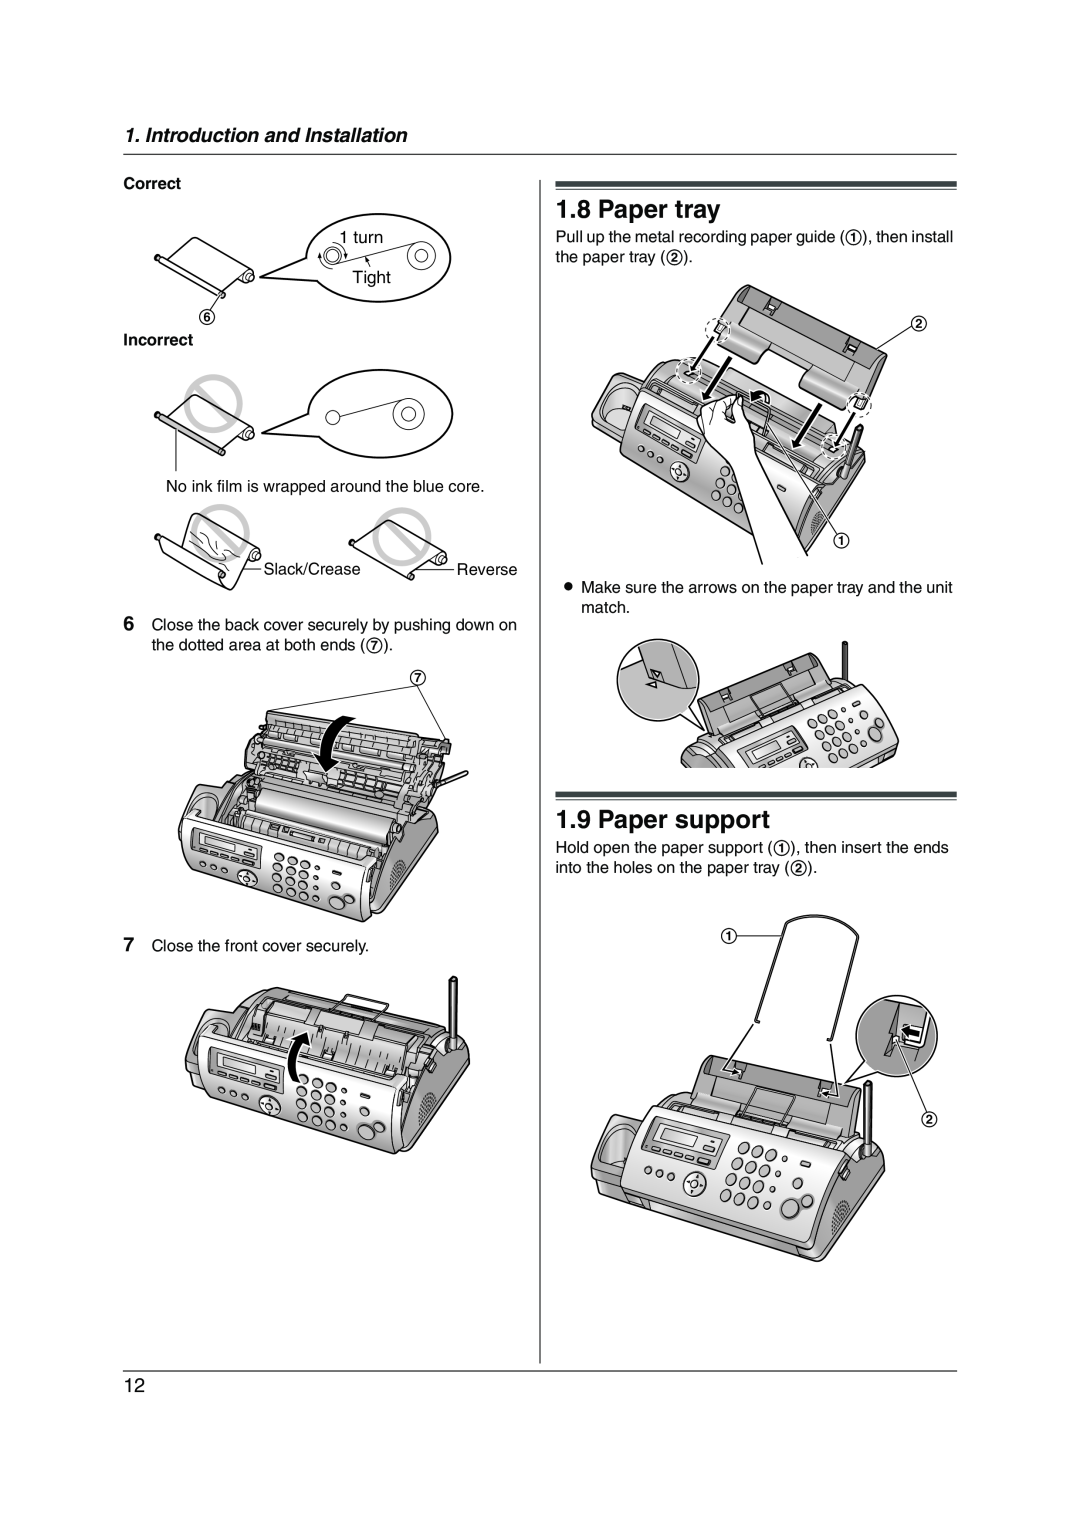 Panasonic KX-FC228HK operating instructions Paper tray, Paper support, turn Tight, Introduction and Installation 